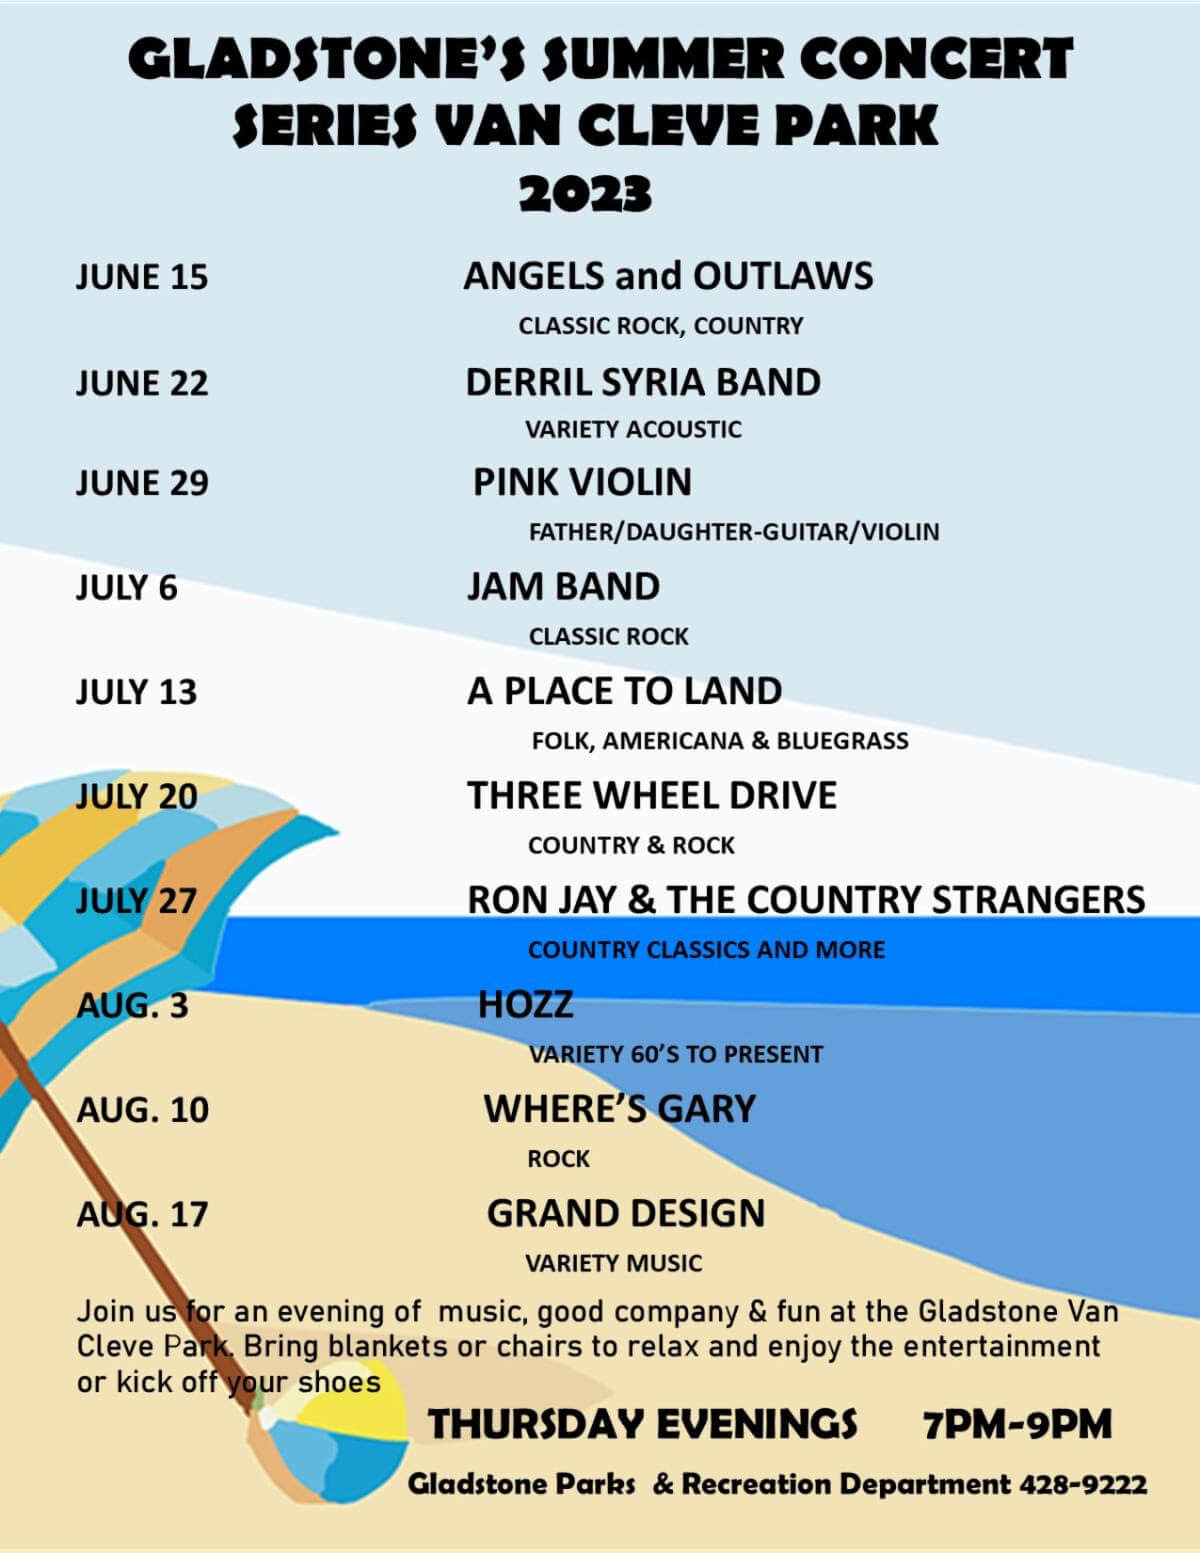 Gladstone's Summer Concert Series Van Cleve Park 2023, June 15 Angels and Outlaws, June 22-Derril Syria Band; June 29-Pink Violin; July6-Jam Band; July 13-A Place to Land; July 20-Three Wheel Drive; July 27 Ron Jay& the Country Strangers; AUg. 3 -Hozz; Aug. 10-Where's Gary; Aug. 17-Grand Design. Join us for an evening of music, good company and fun at the Gladsont VAn Cleve Park. Bring blankets or chairs to relac and enjoy the entertainment or kick of your shoes. Thursday evenings from 7 pm to 9 pm. Gladstone Parks and Recreation Department 906-428-9222